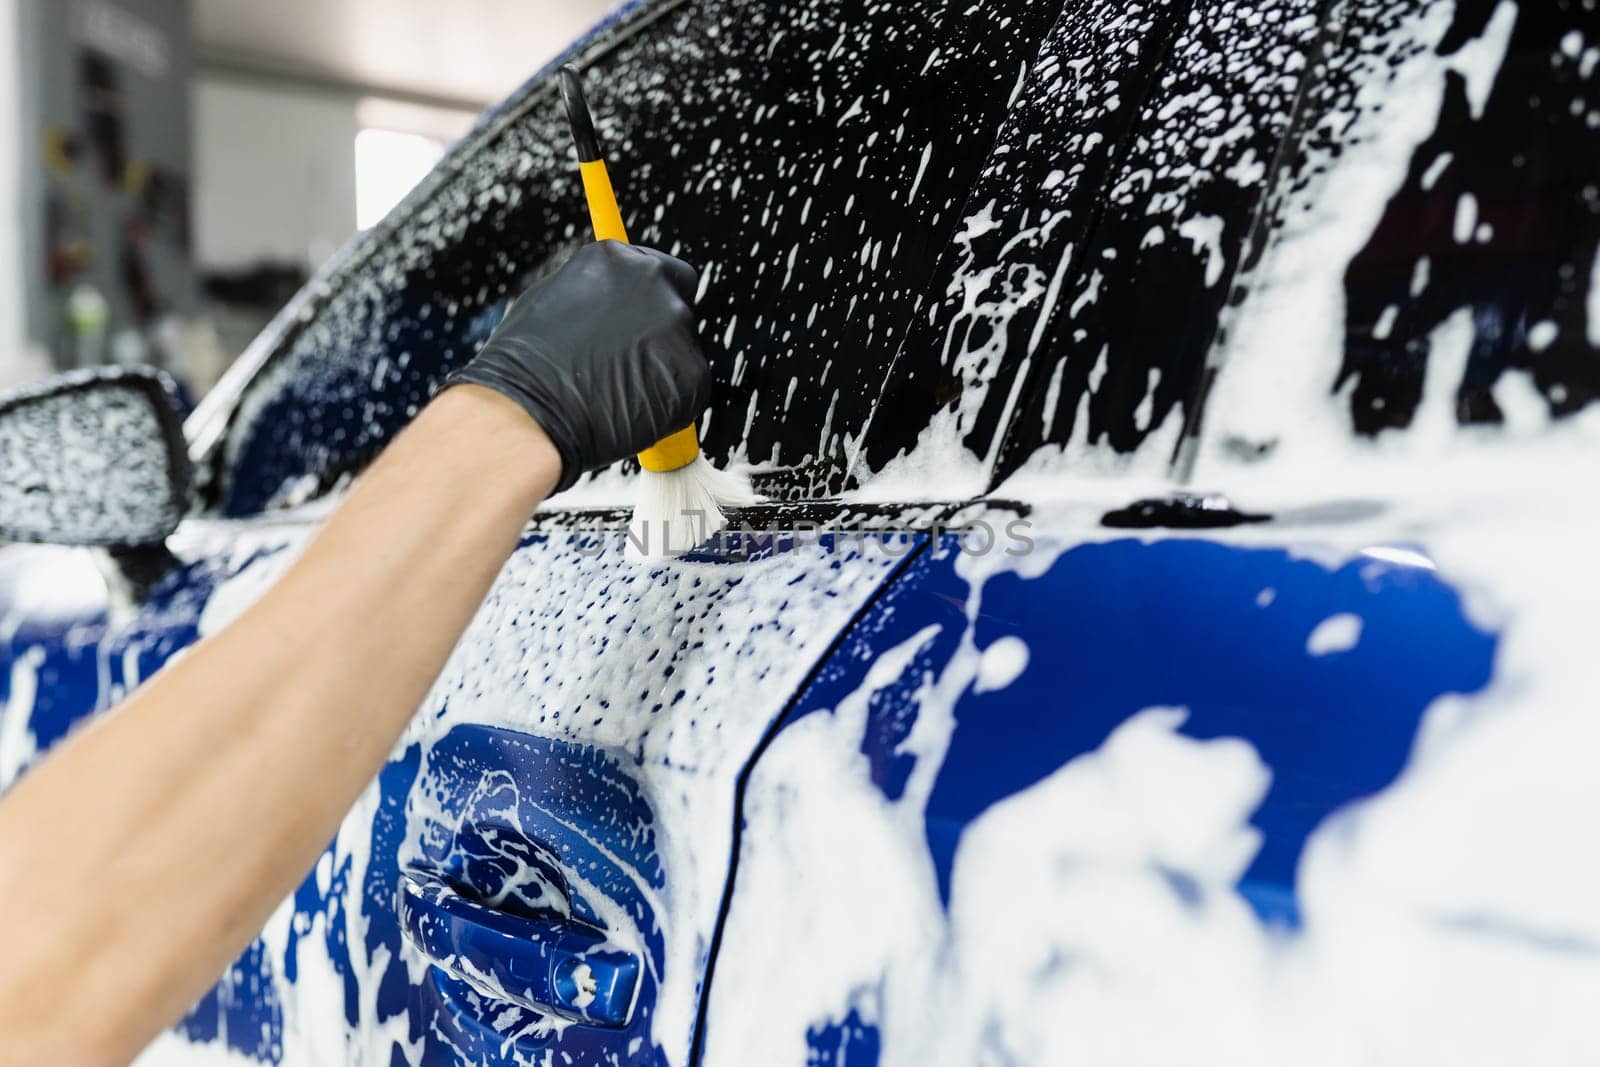 Hand brush washing of car body with foam in car detailing service. Car wash worker washes a car body